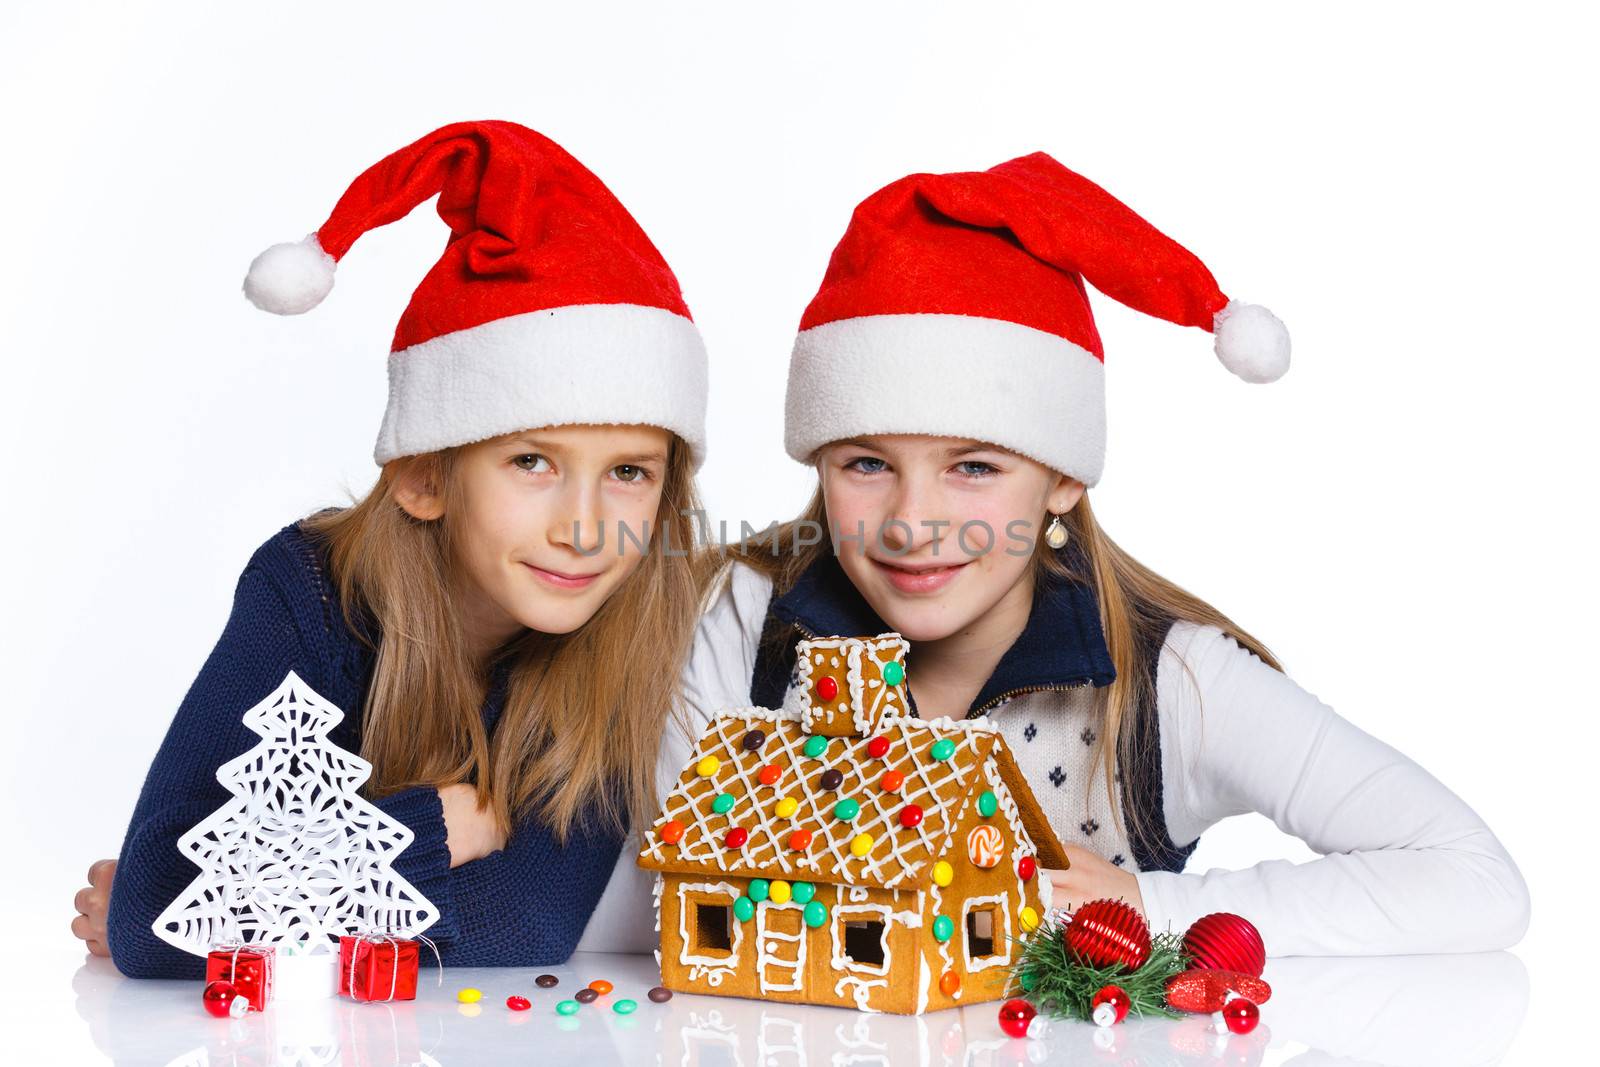 Christmas theme - Two smiling girl in Santa's hat with gingerbread house, isolated on white